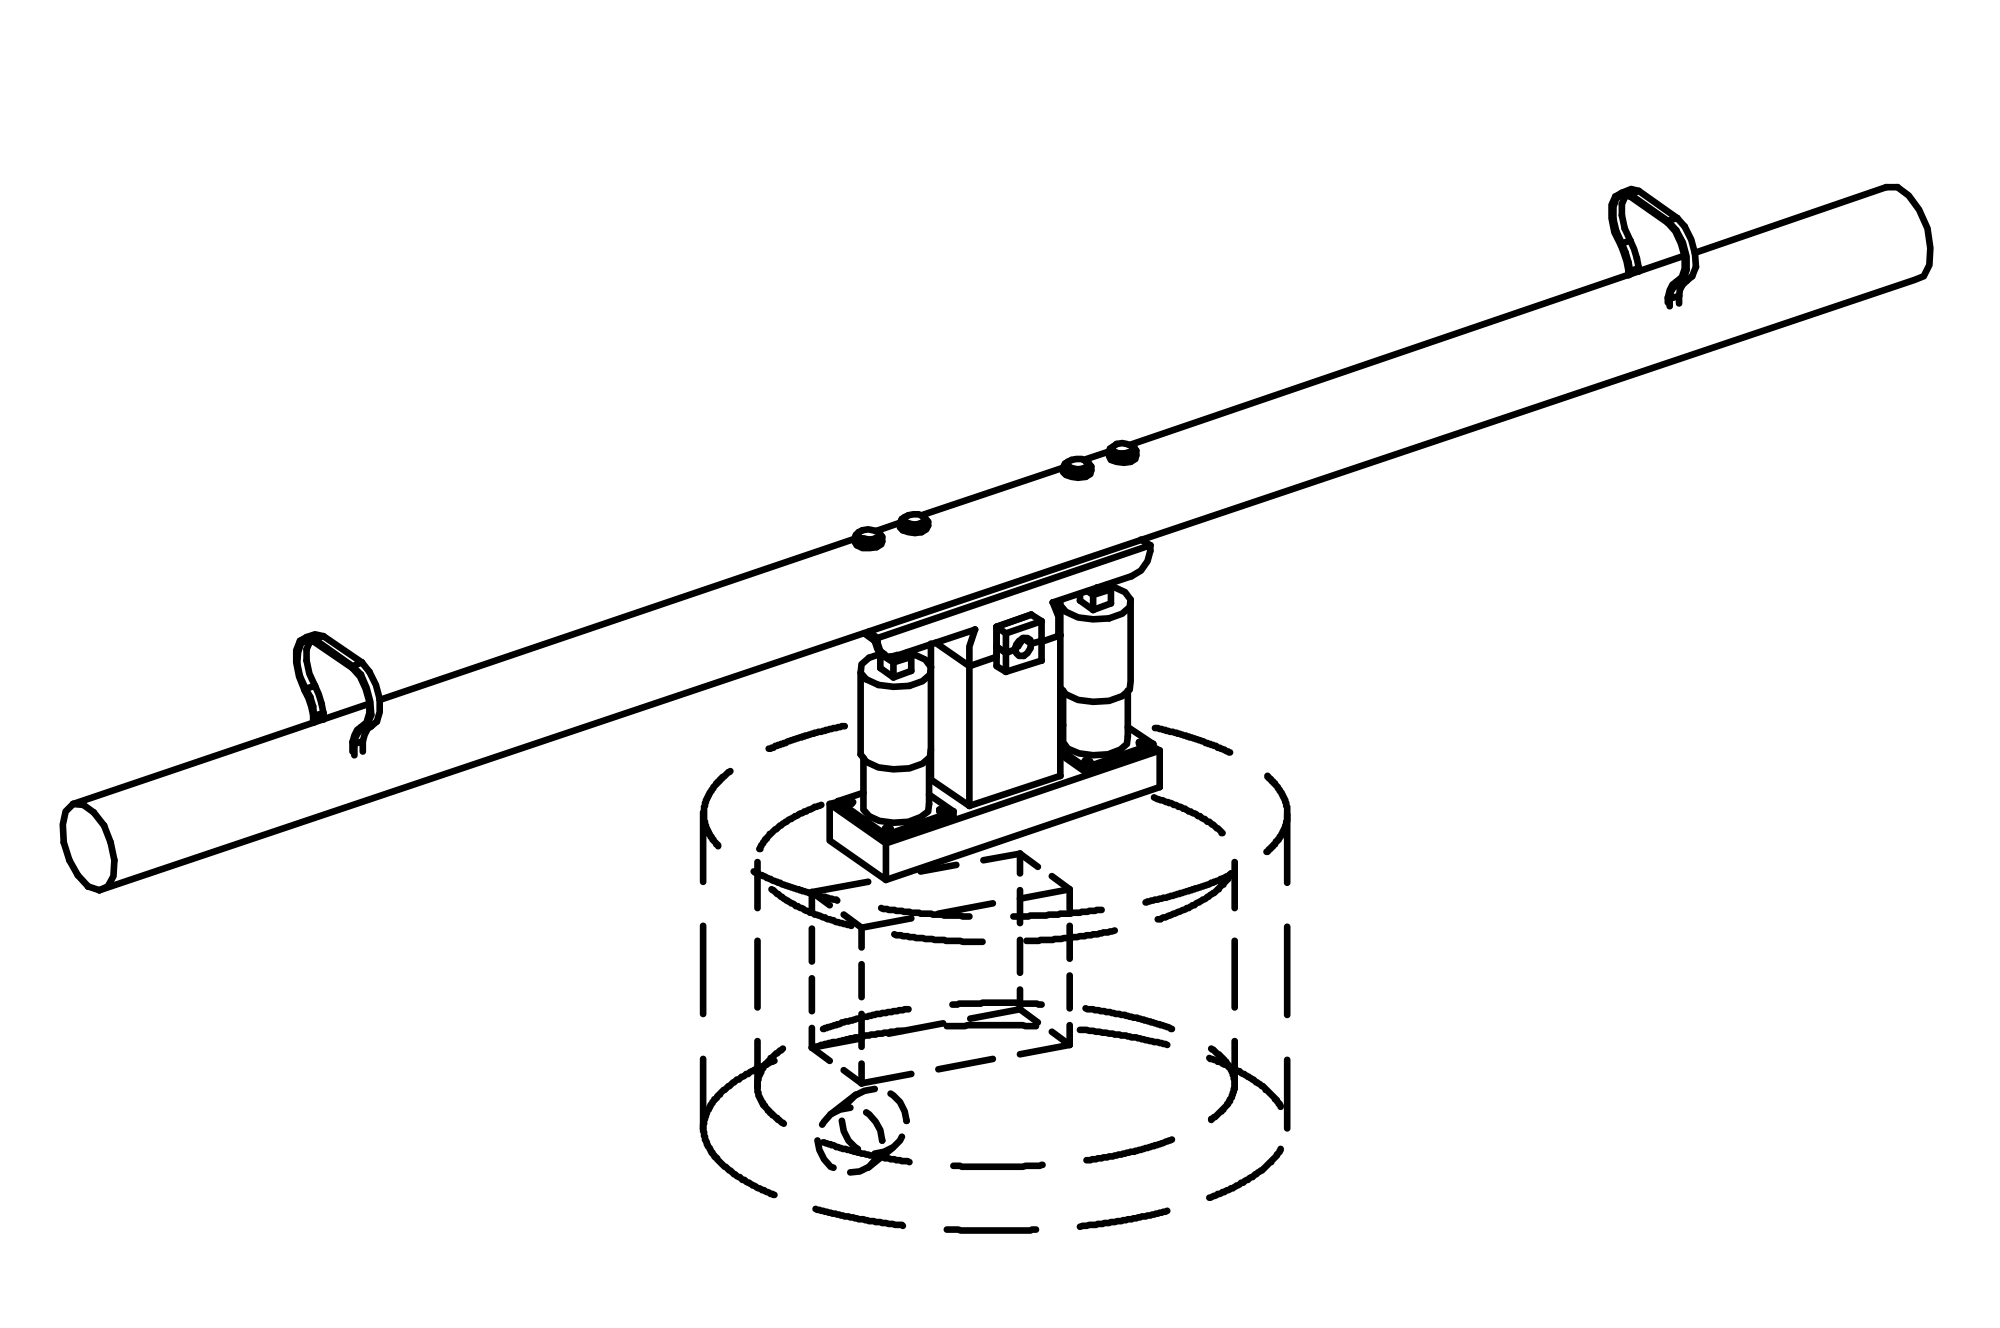 Pump See-saw with water reservoir and two way distribution